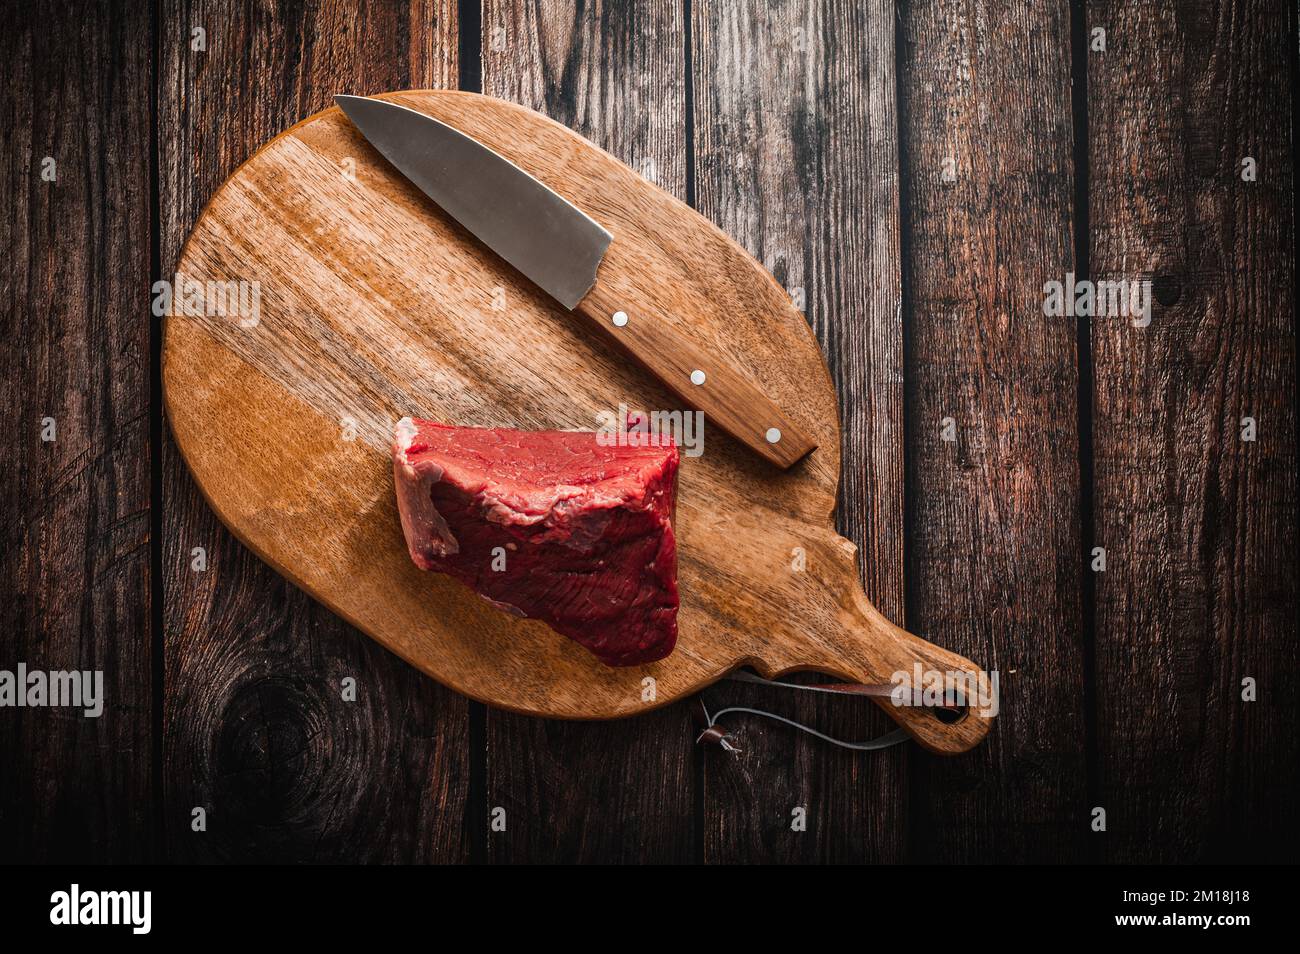 A piece of raw beef on a wooden cutting board with a knife. Wooden table, top down view, flat lay. Stock Photo